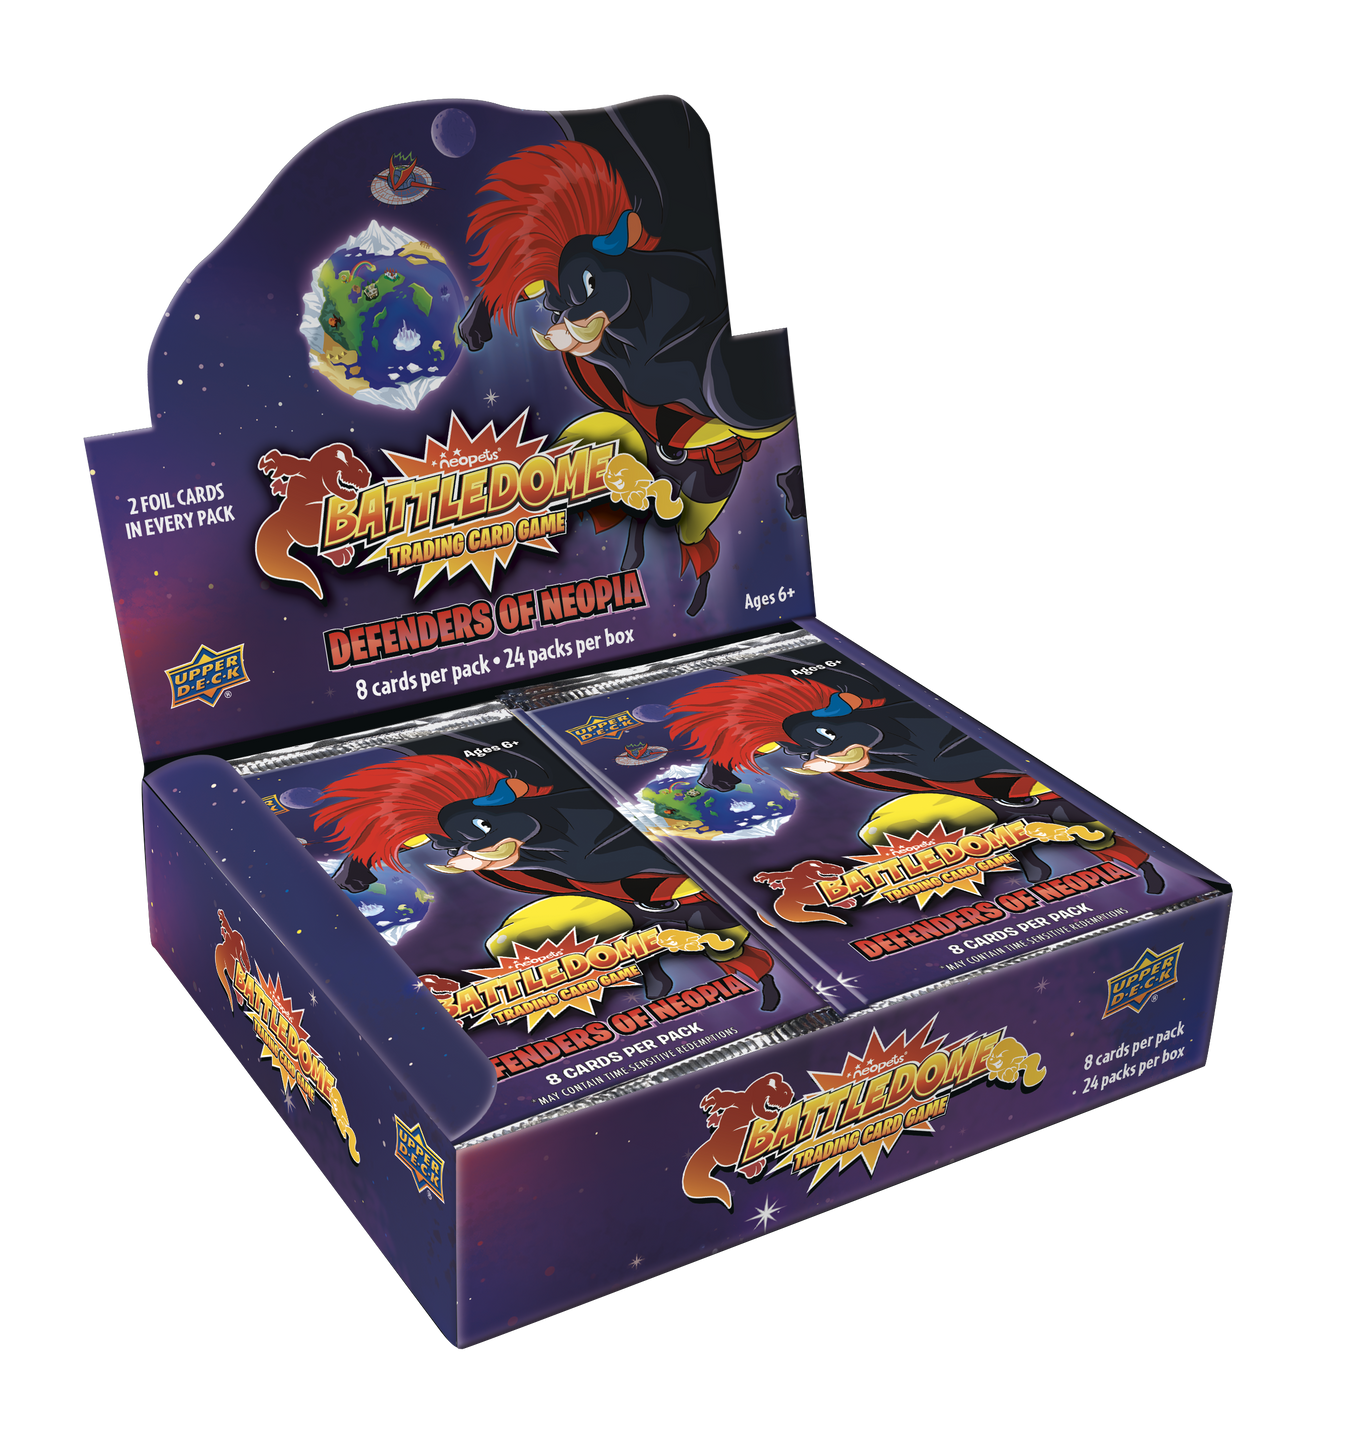 Neopets Battledome  Trading Card Game